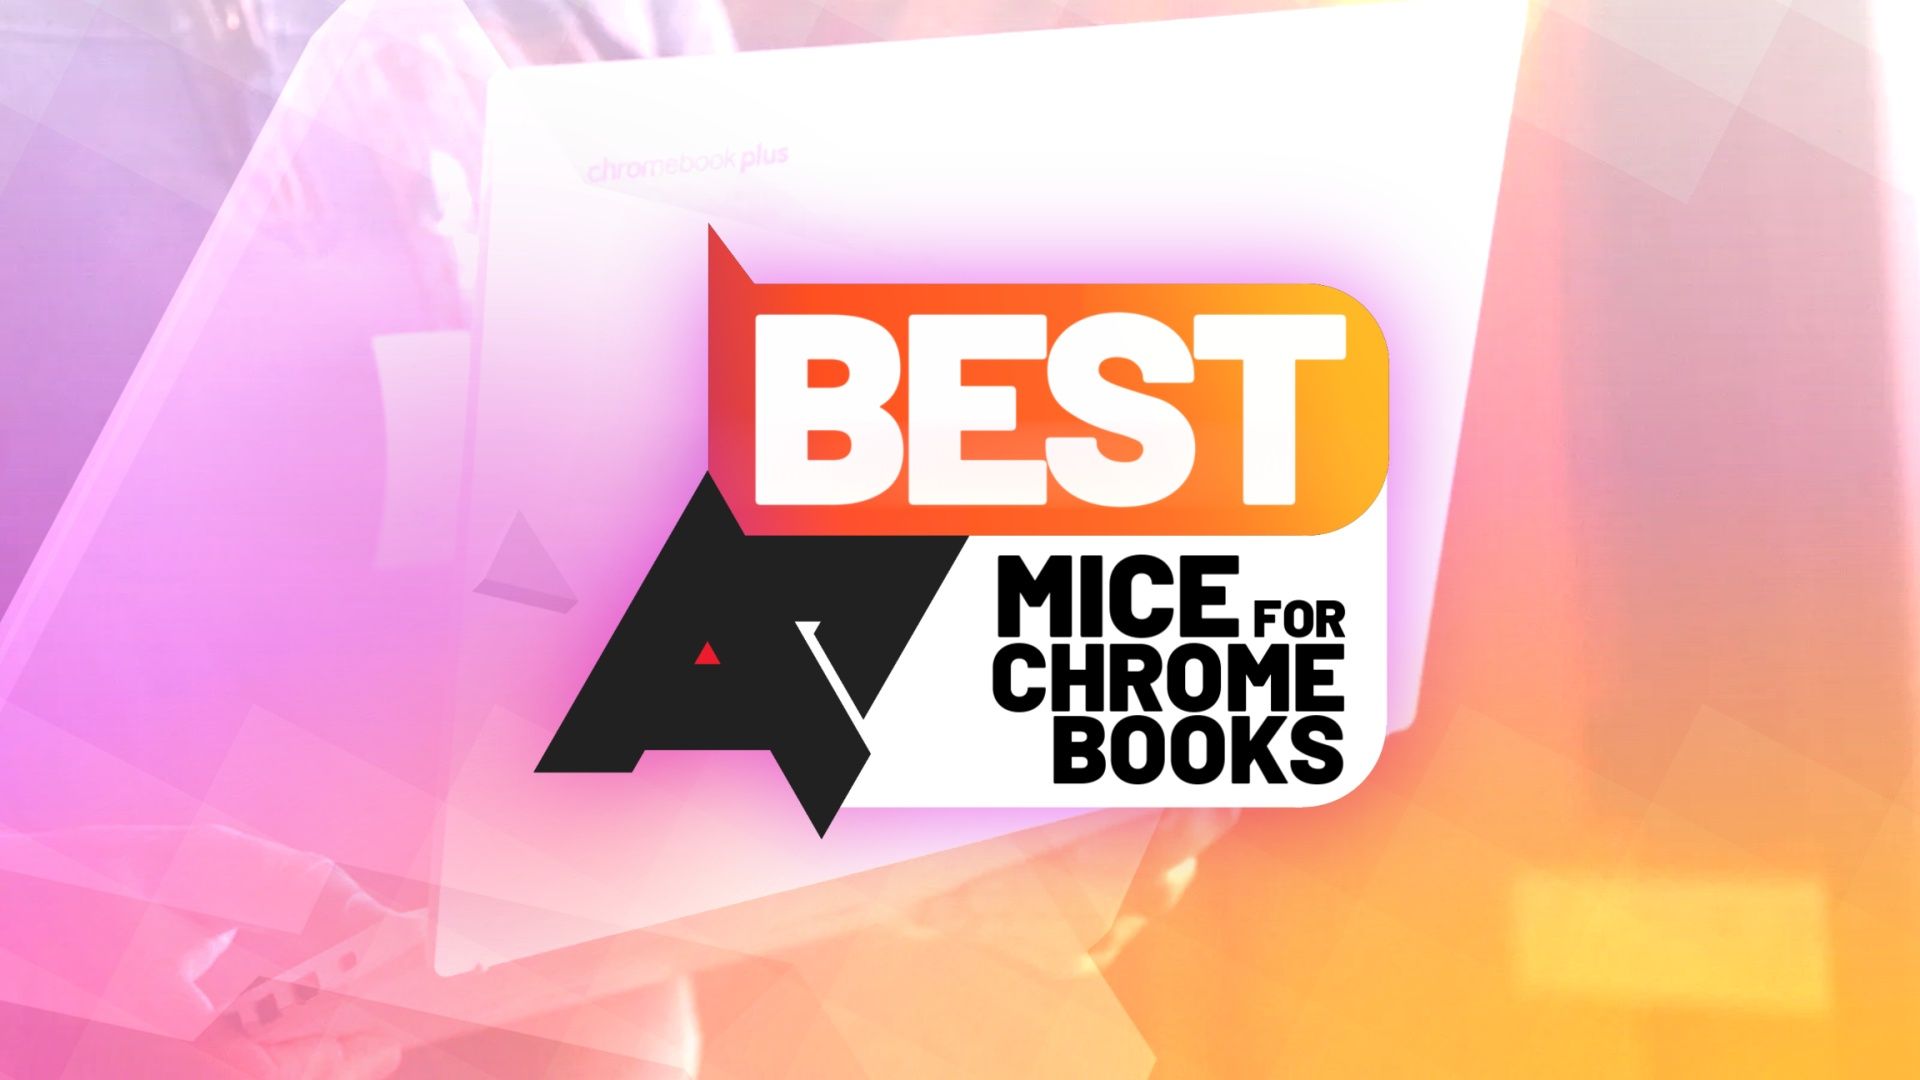 An image of a Chromebook Plus with an 'AP Best mice for Chromebooks' logo on top